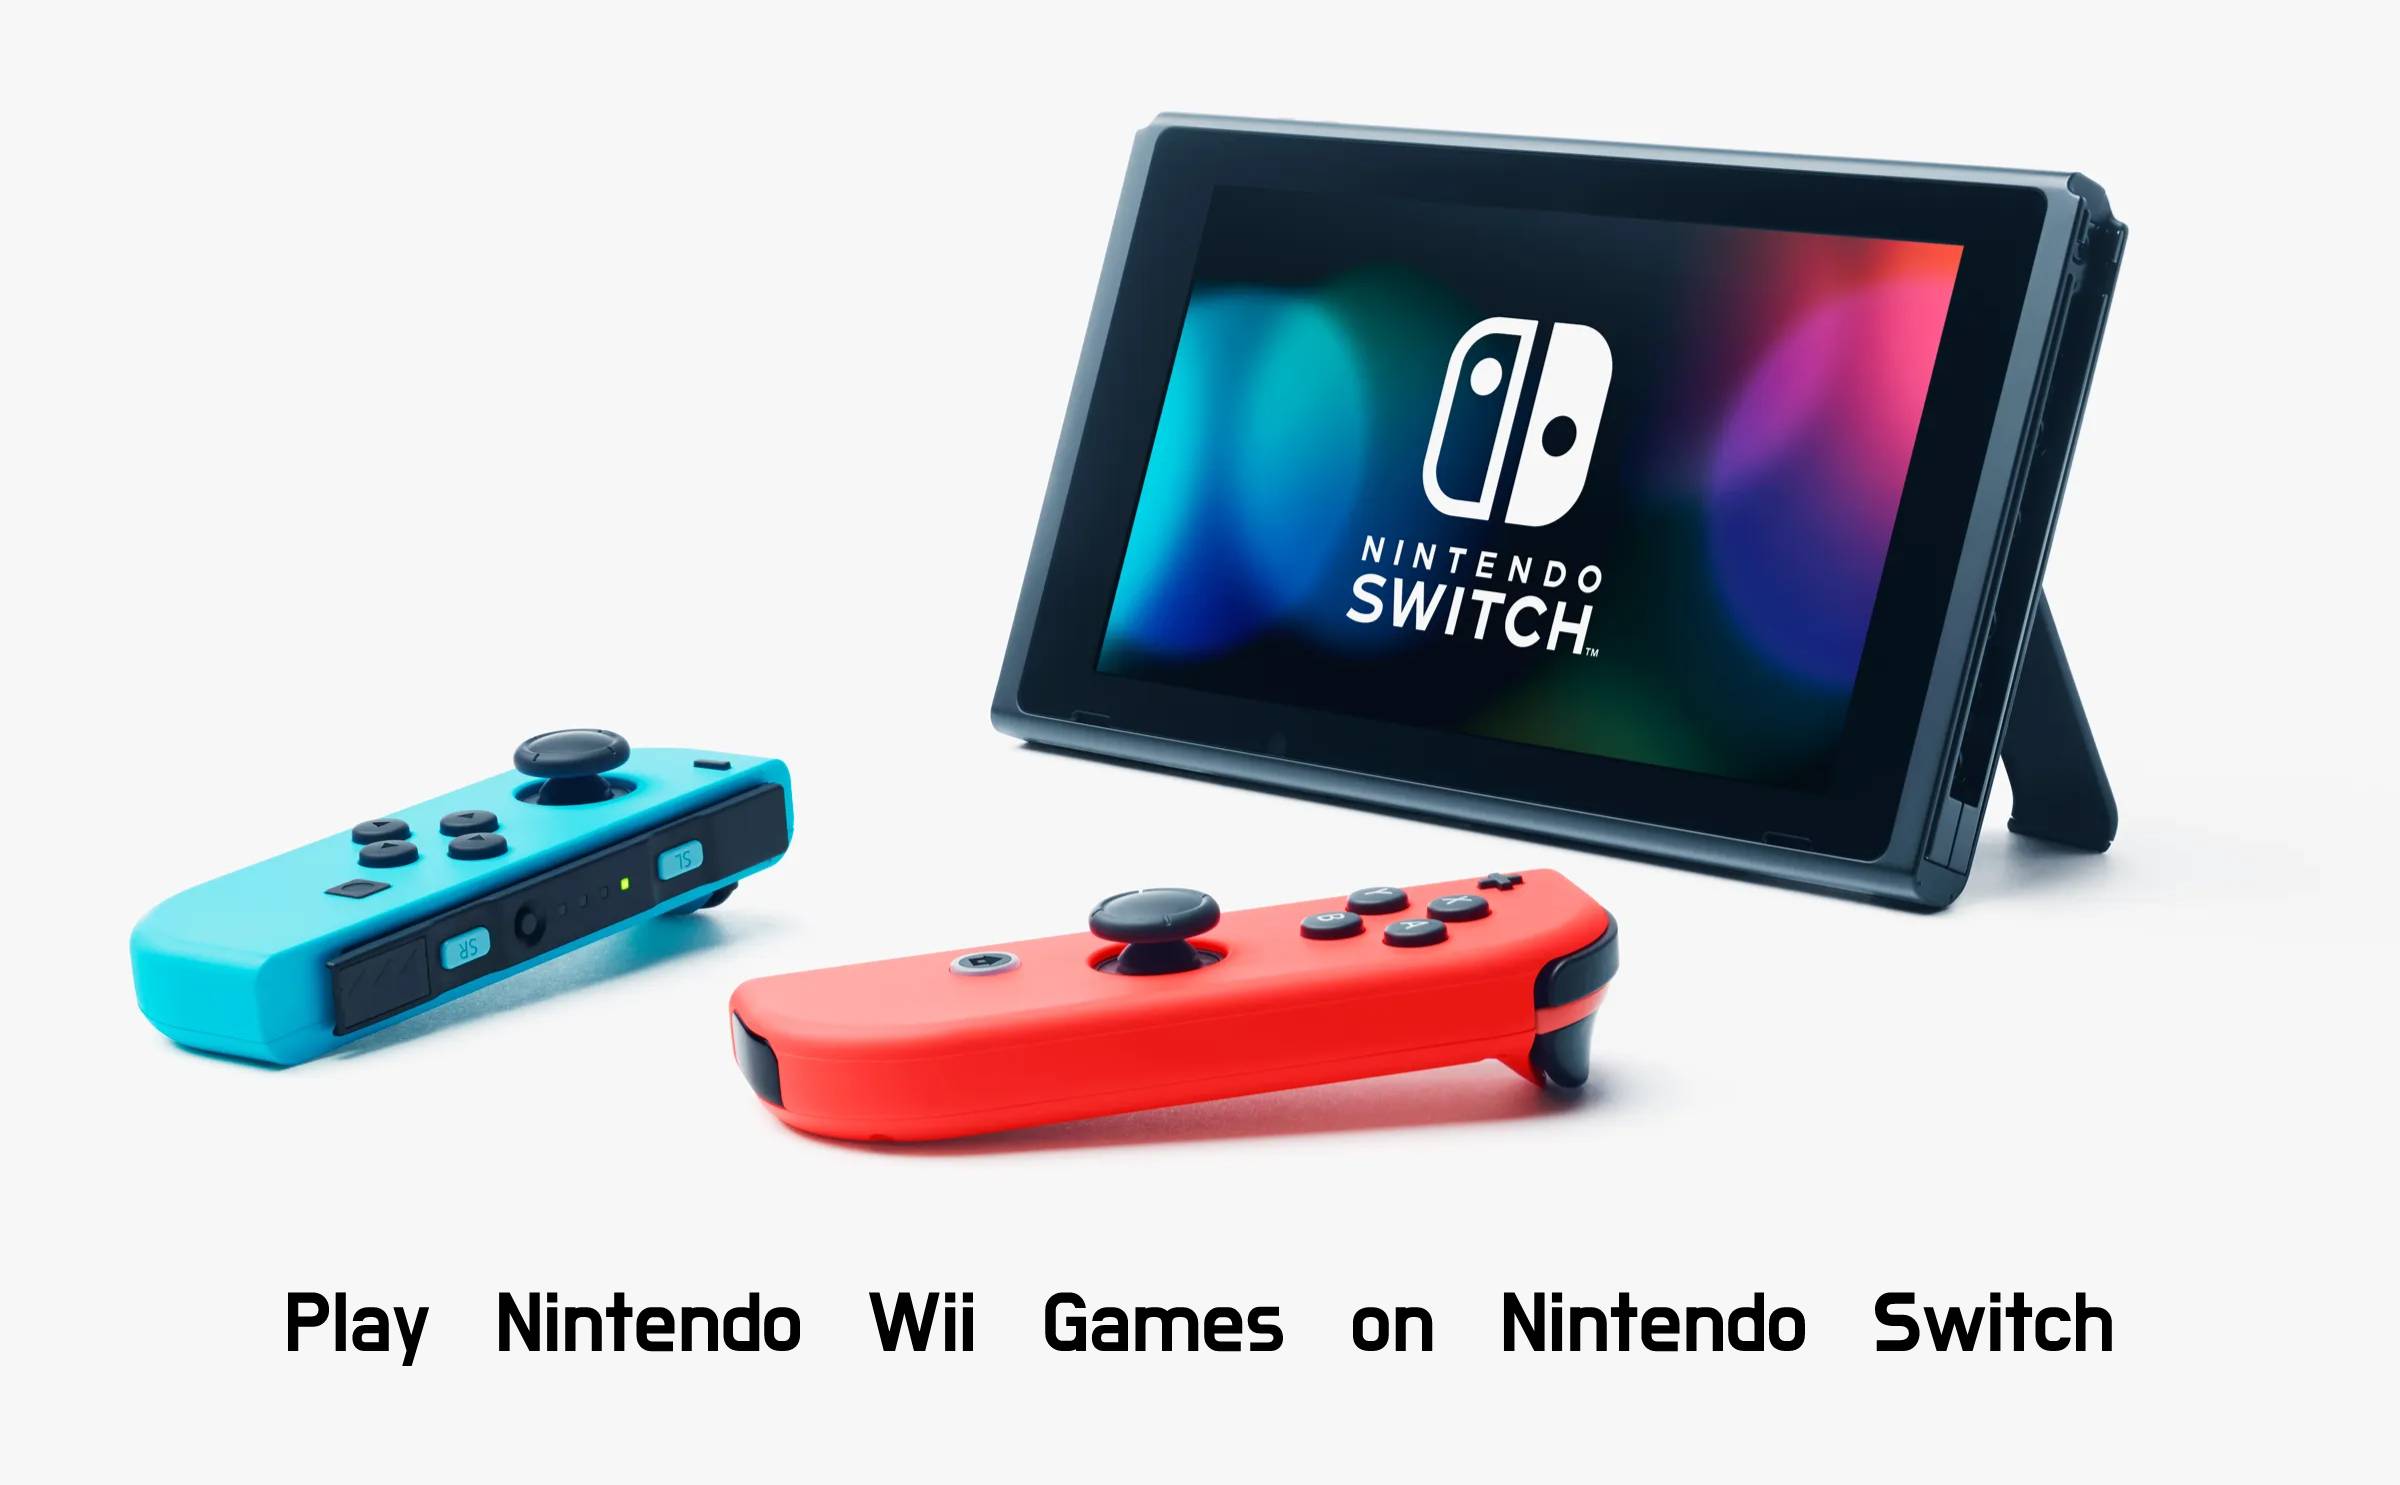 Can you play Wii games on the Nintendo Switch?